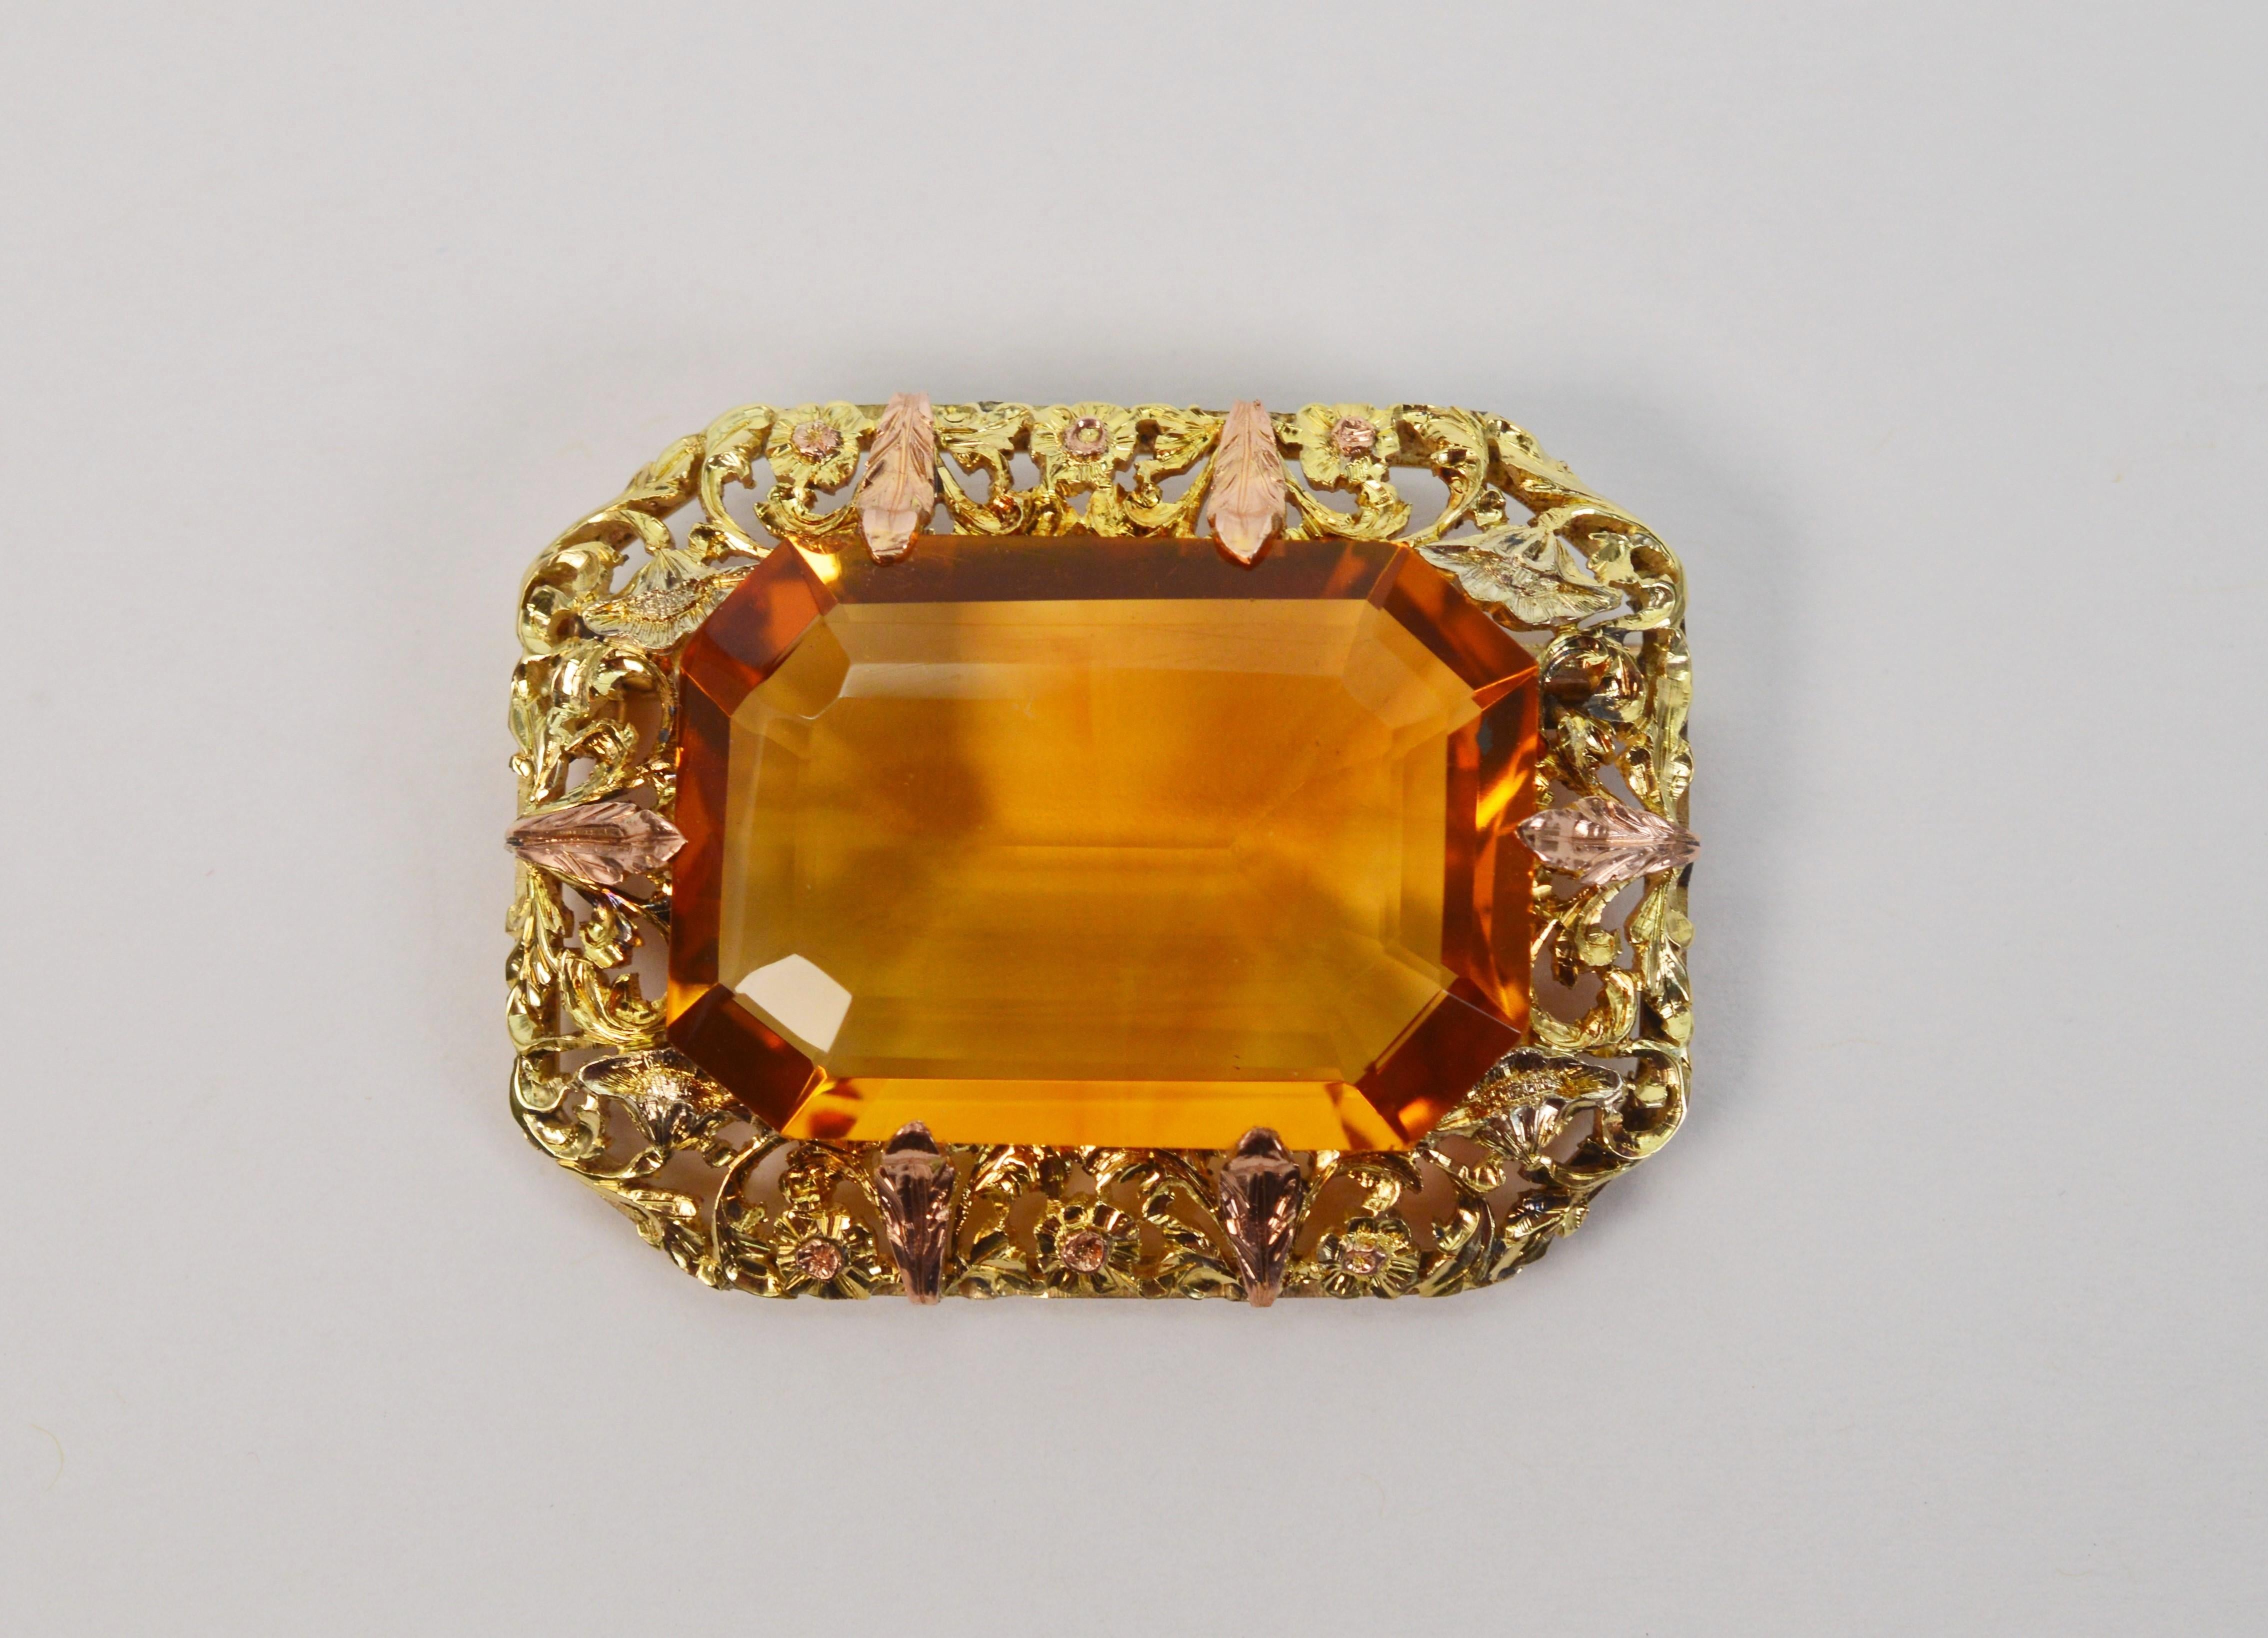 Outstanding circa 1940 finery, a remarkable seventy carat emerald cut natural orange brown citrine is artfully displayed in hand tooled gold filigree made of twelve karat 12k yellow gold and adorned with rose gold accents. The AAA stone is eye clean